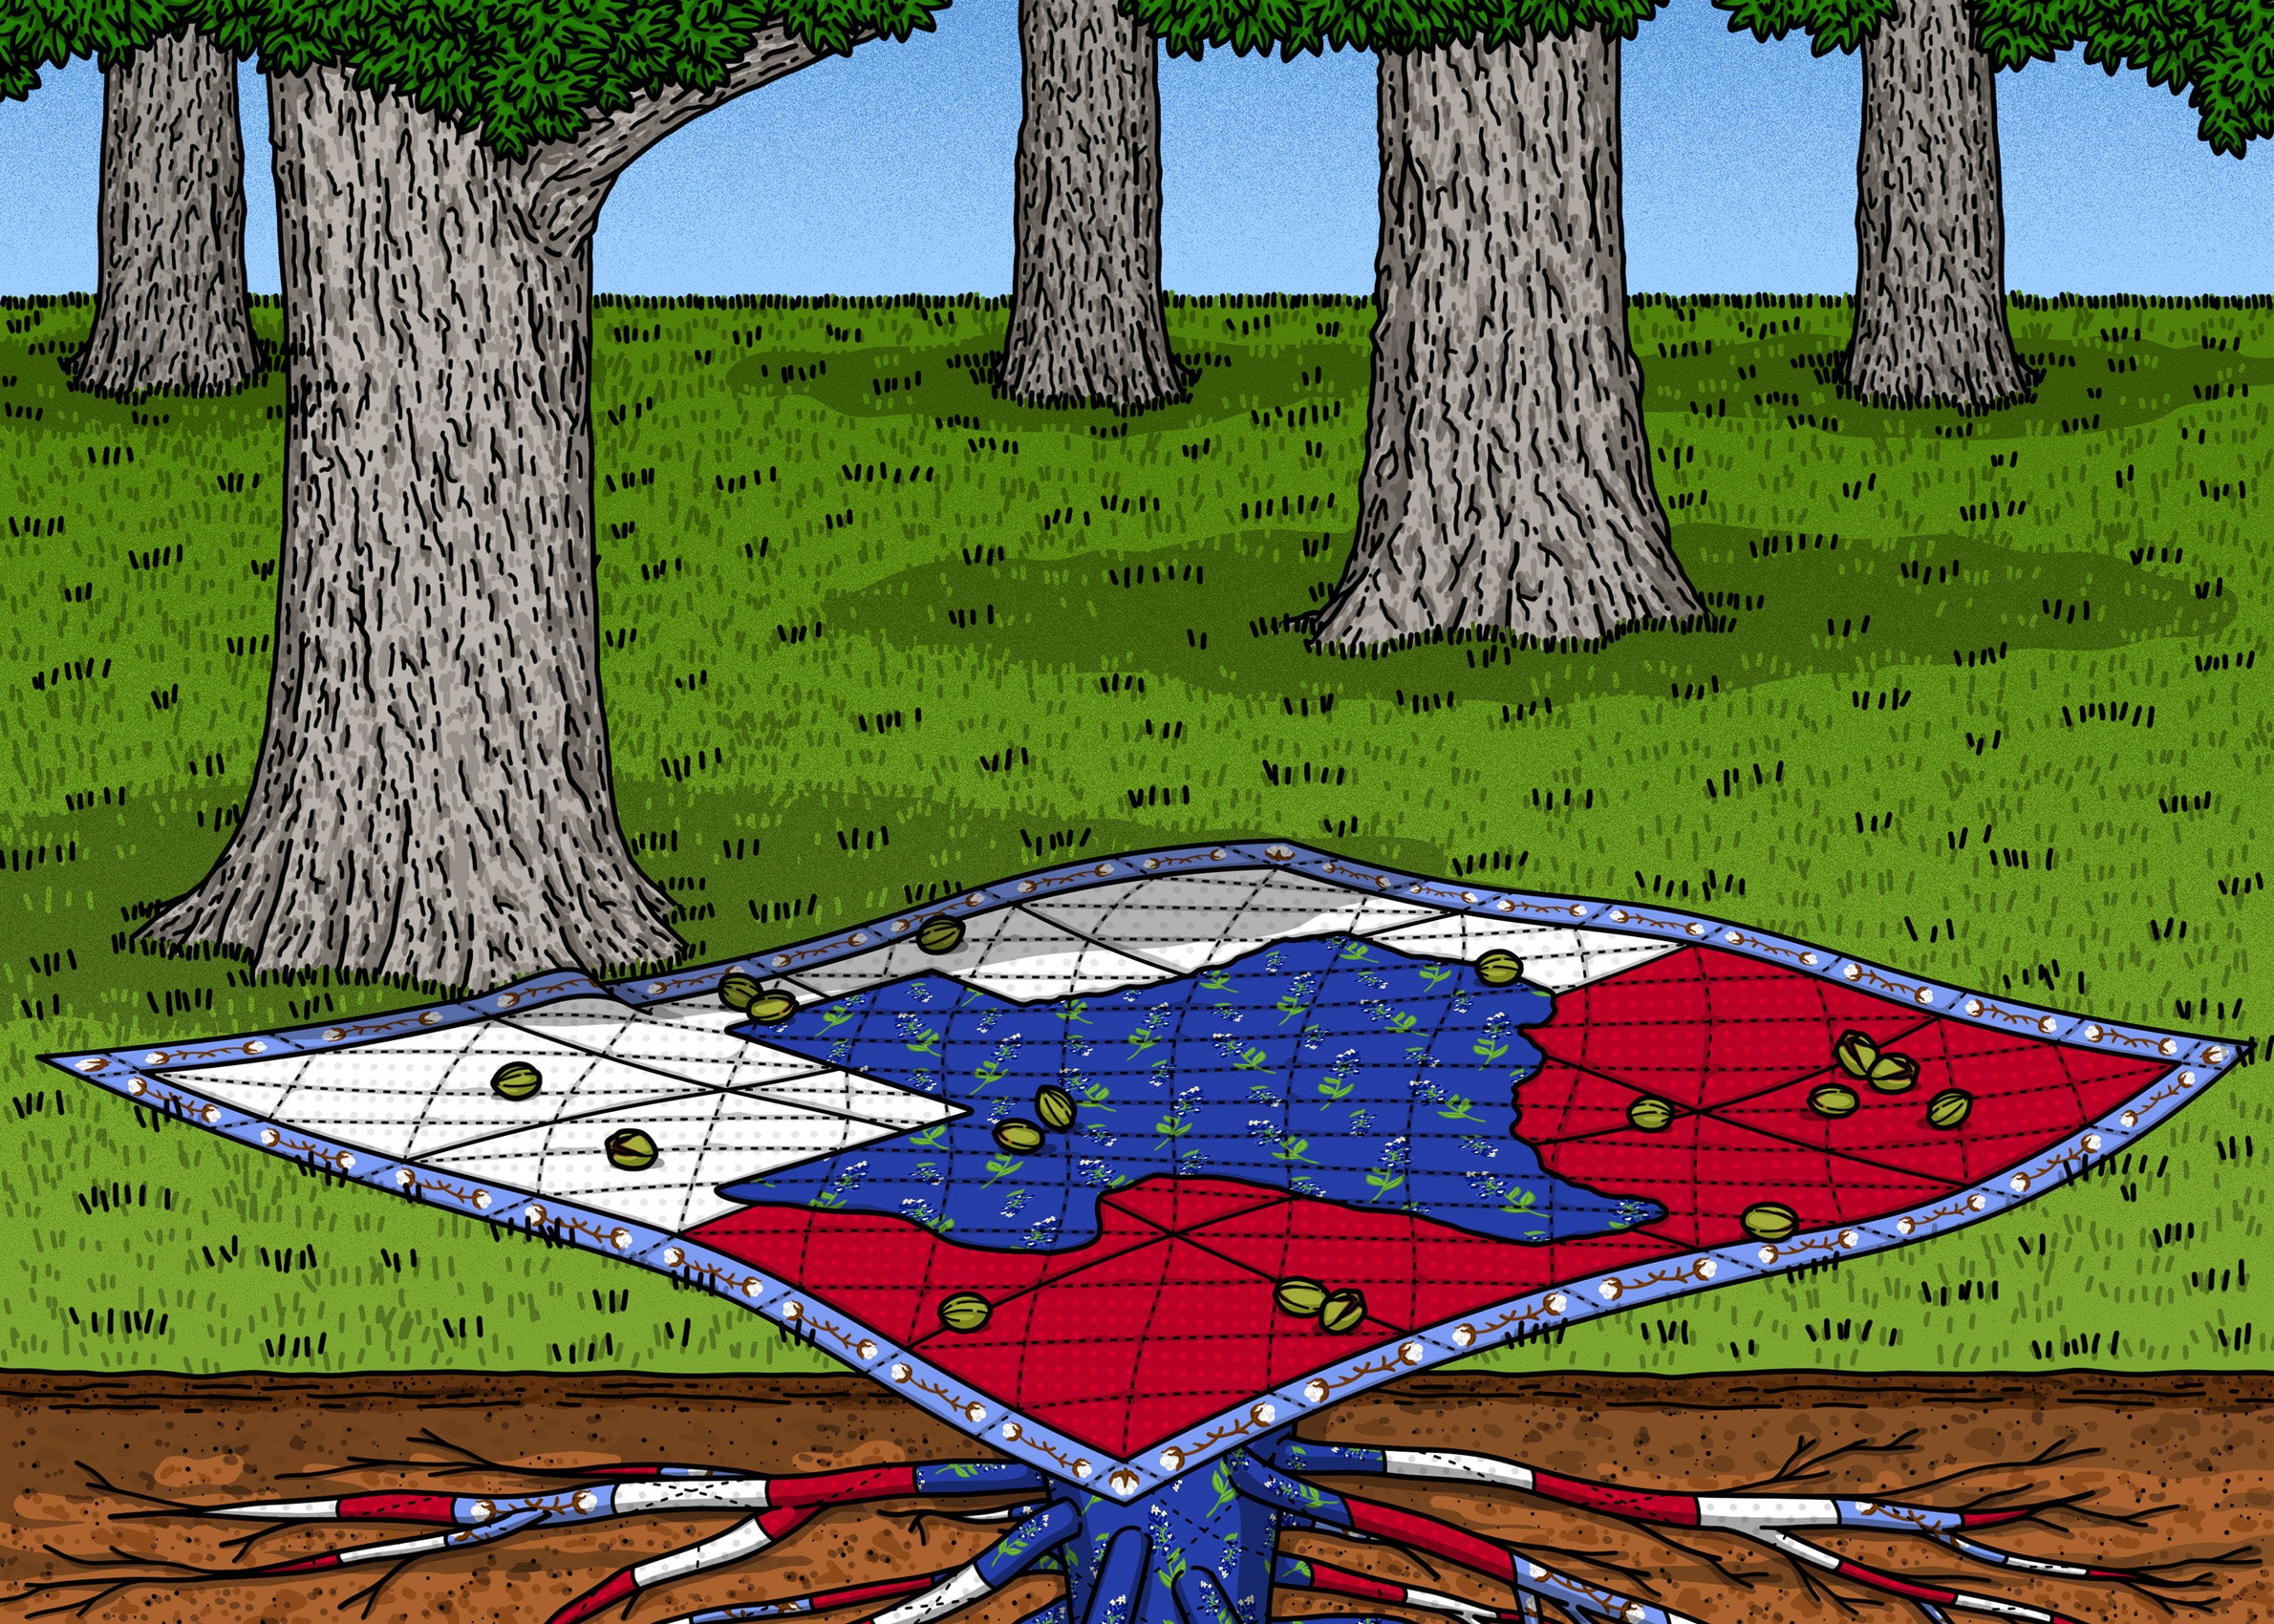 Illustration set in forest. A red while and blue quilt on the ground which shows the state of Texas and below it roots in red white and blue